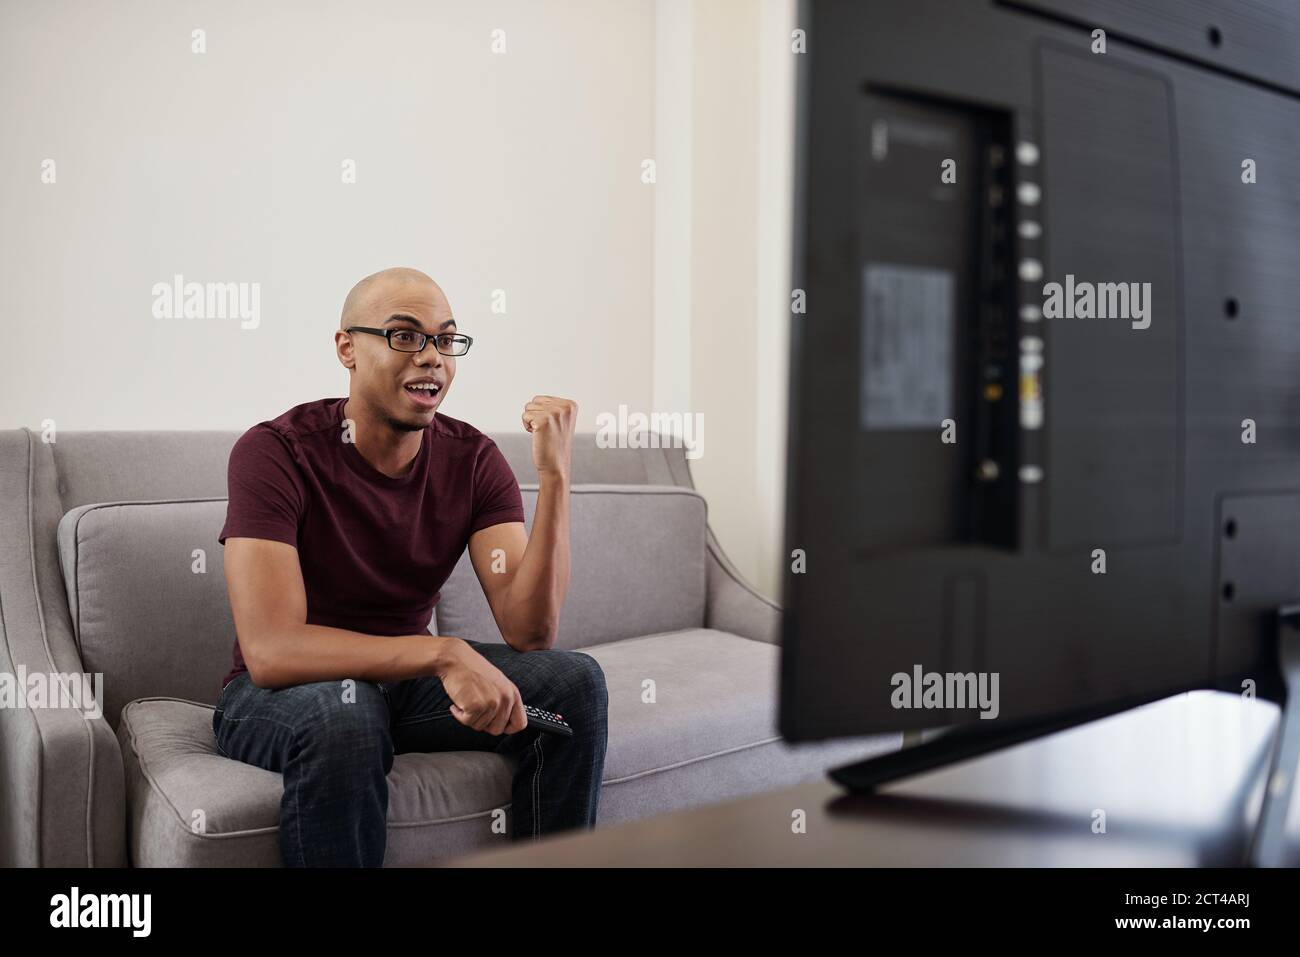 Man watching competition on tv Stock Photo